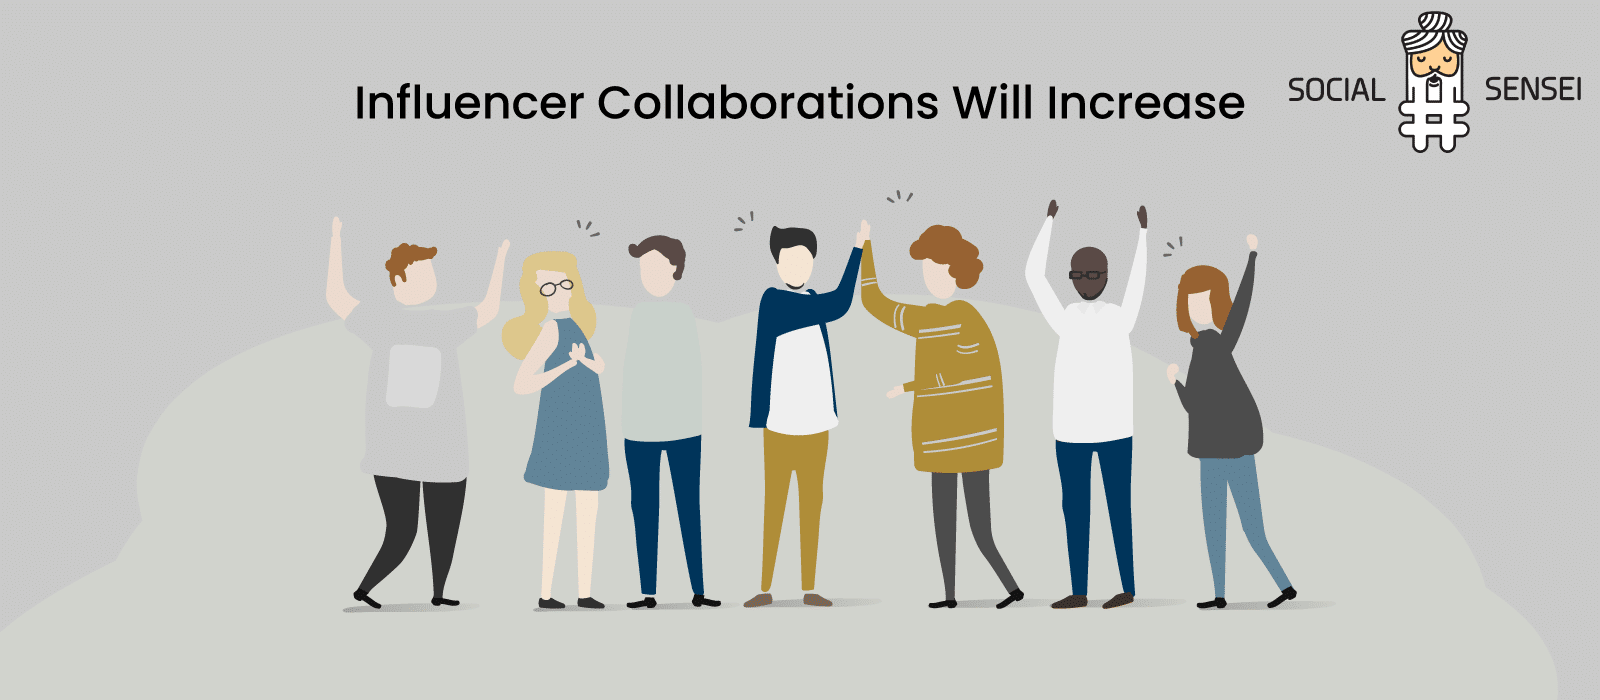 Influencer Collaborations Will Increase